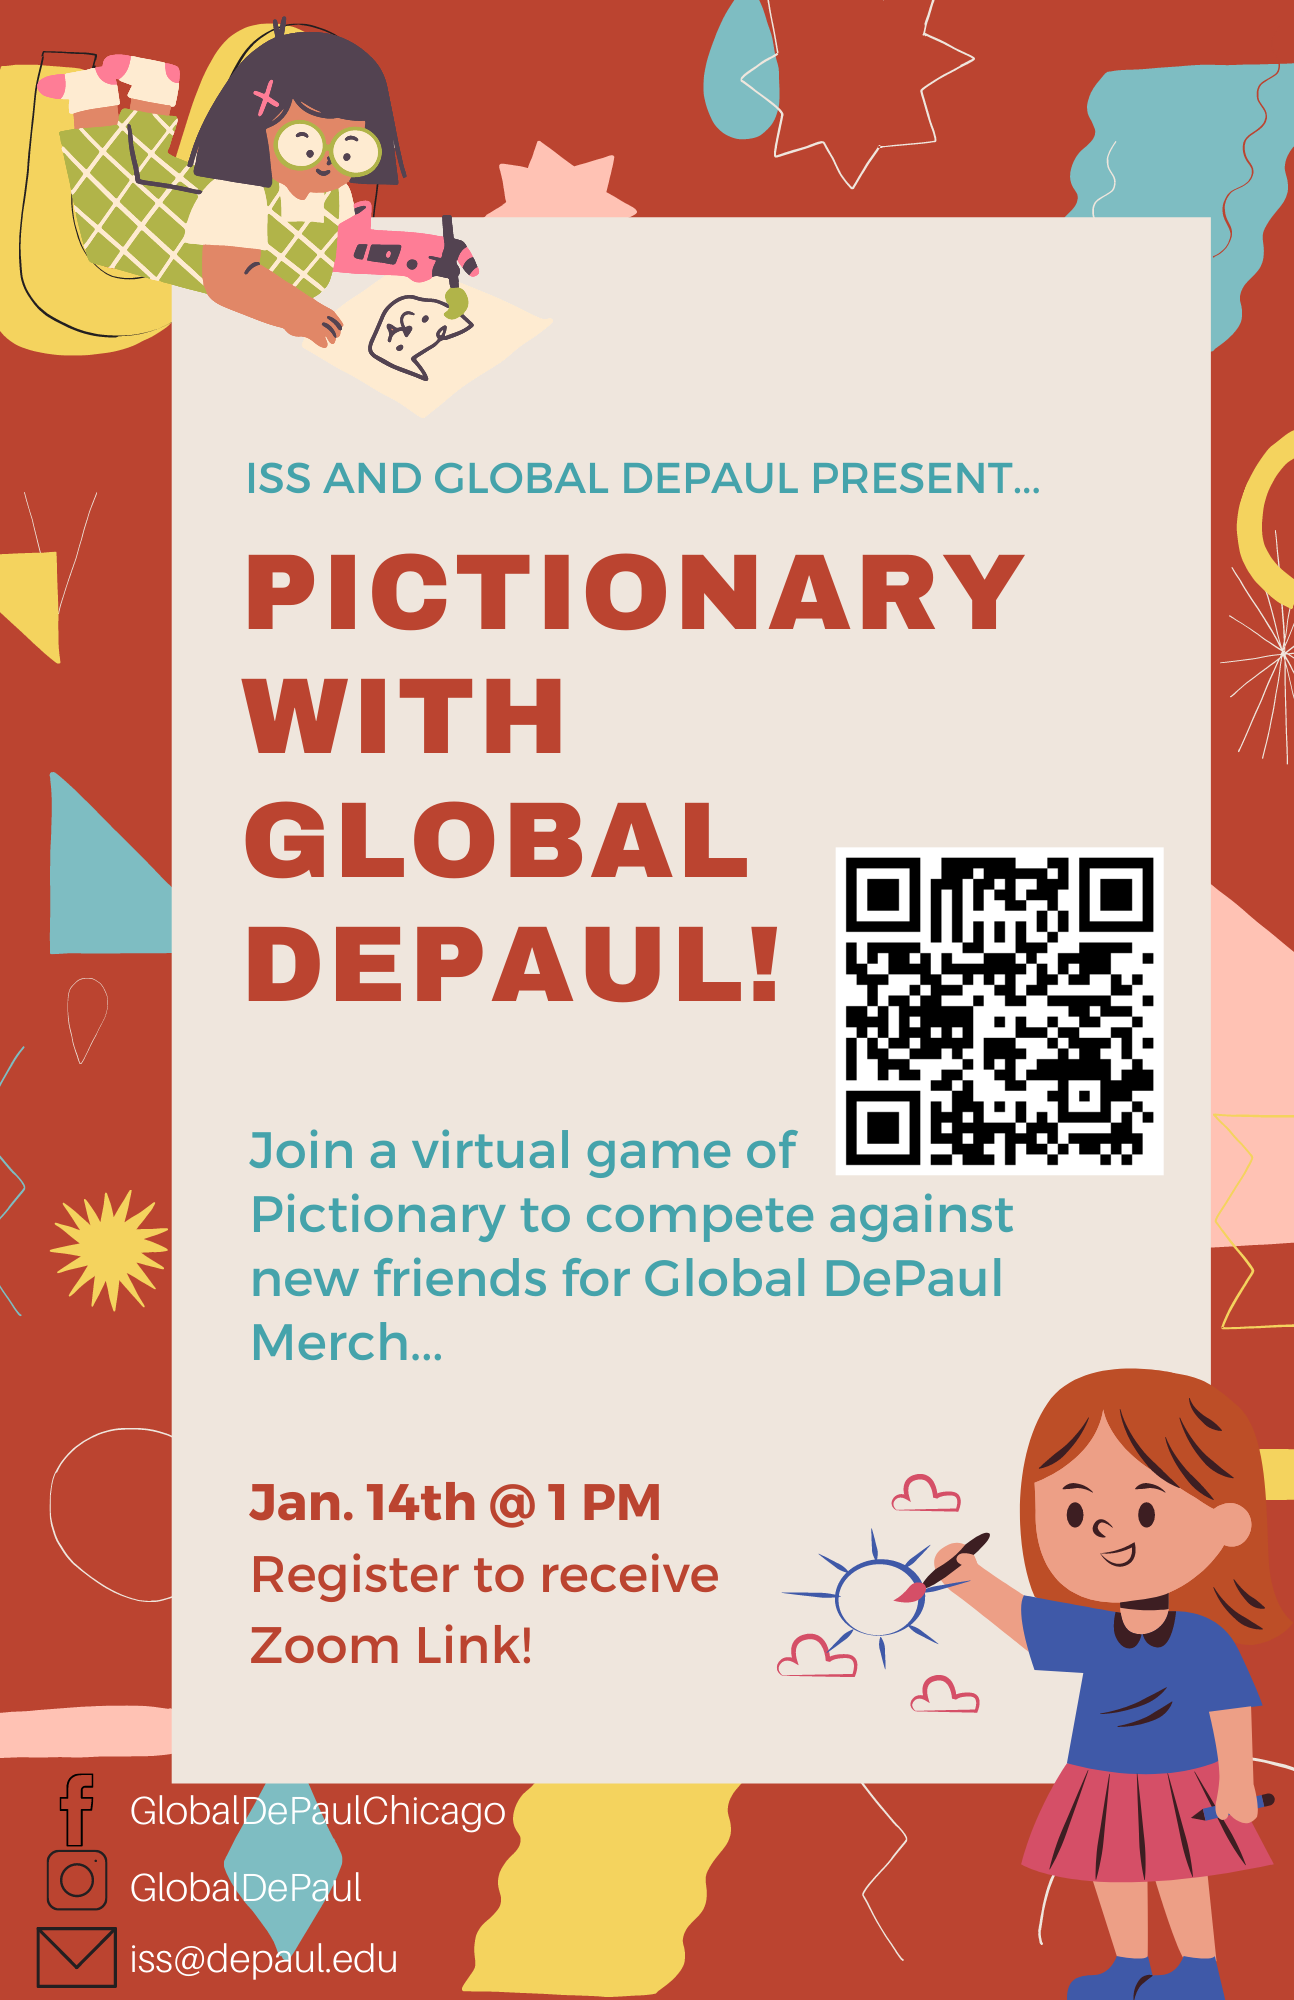 Join us for Pictionary on January 14th 2022 